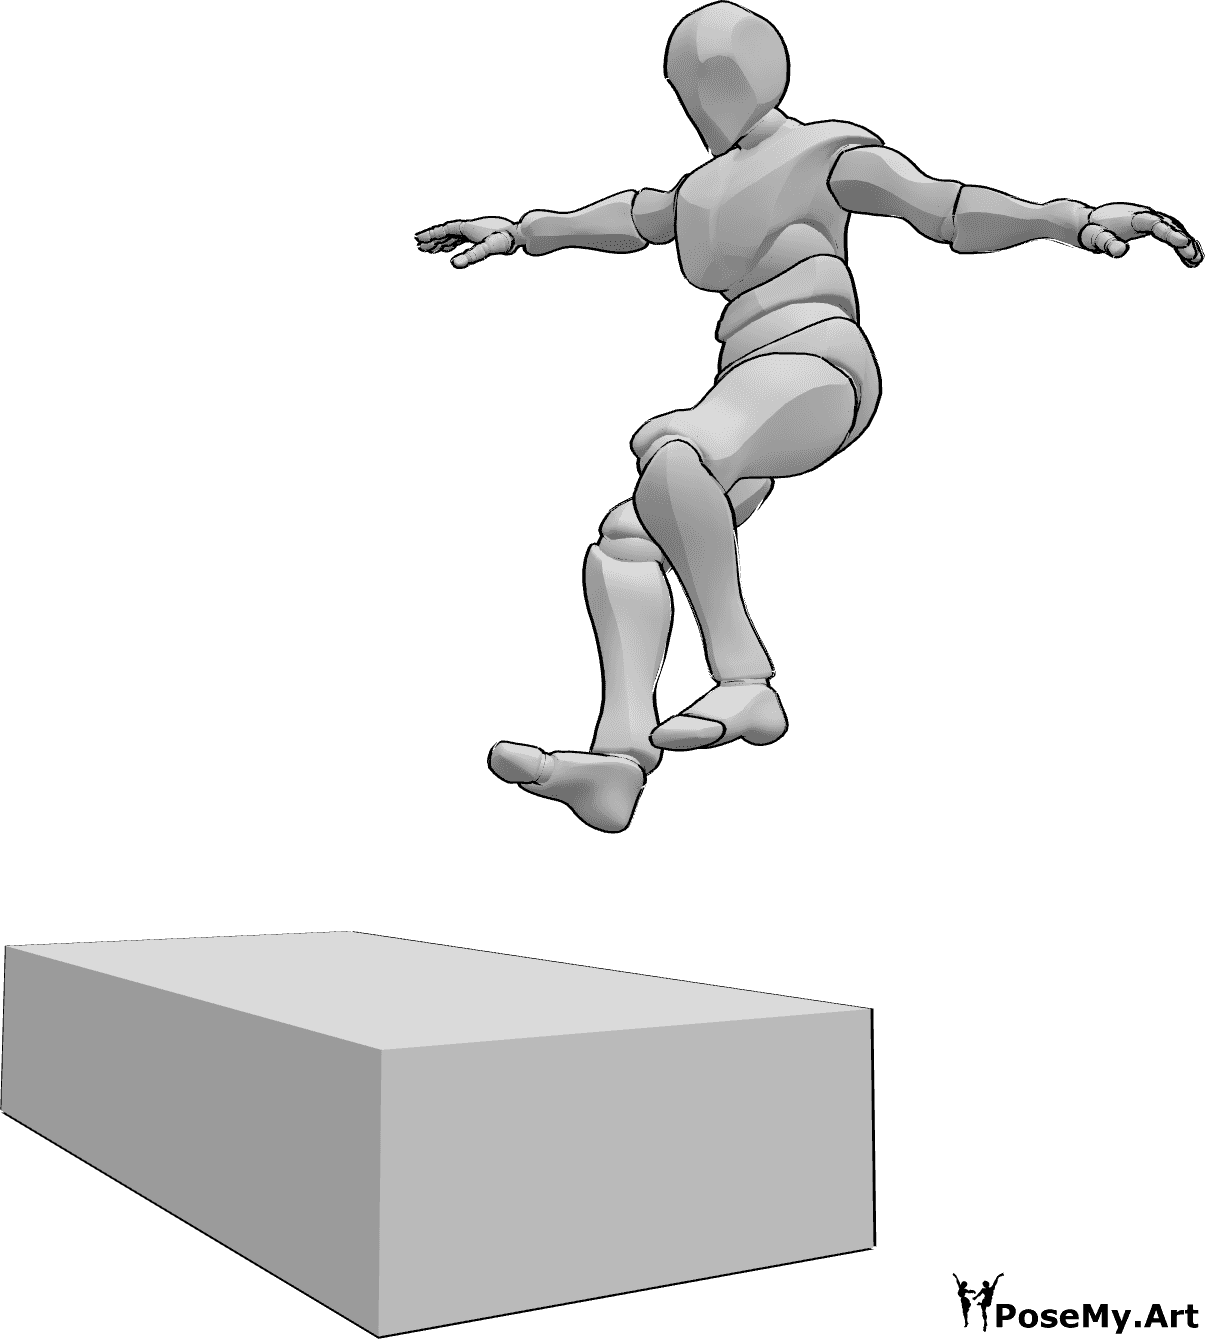 Pose Reference- Parkour landing wall pose - Male is jumping from high, preparing for landing on a wall, spreads his arms